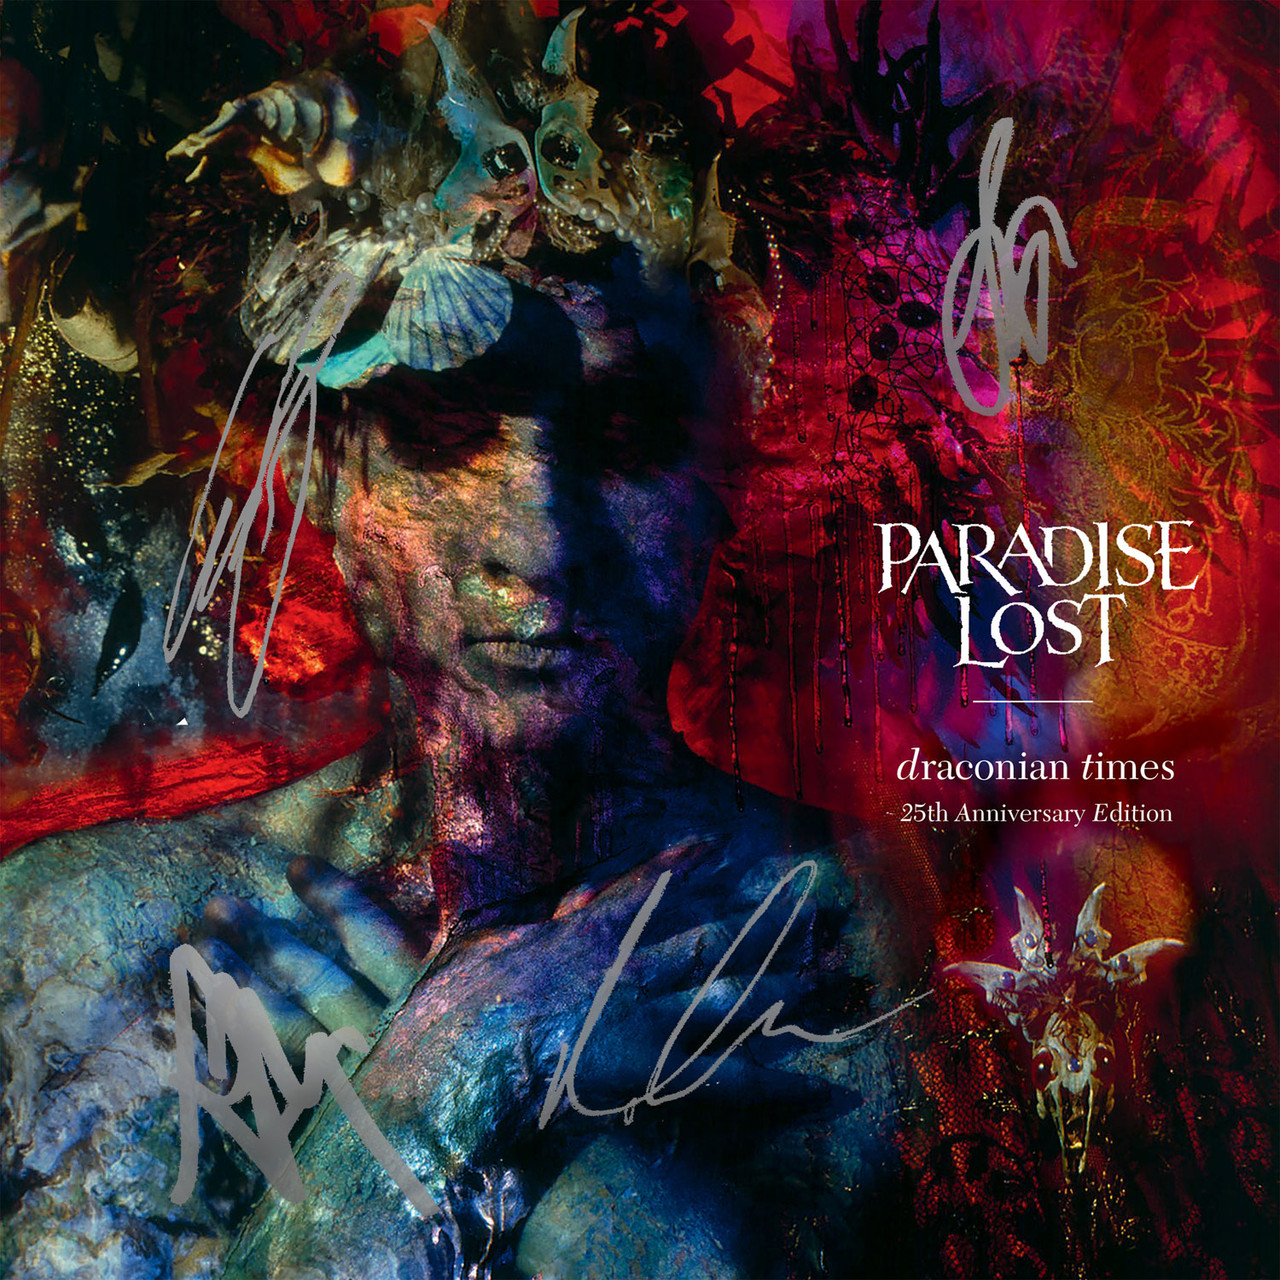 Paradise Lost 'Draconian Times 25th Anniversary Edition' Exclusive Deluxe Gatefold 2LP Splatter Vinyl